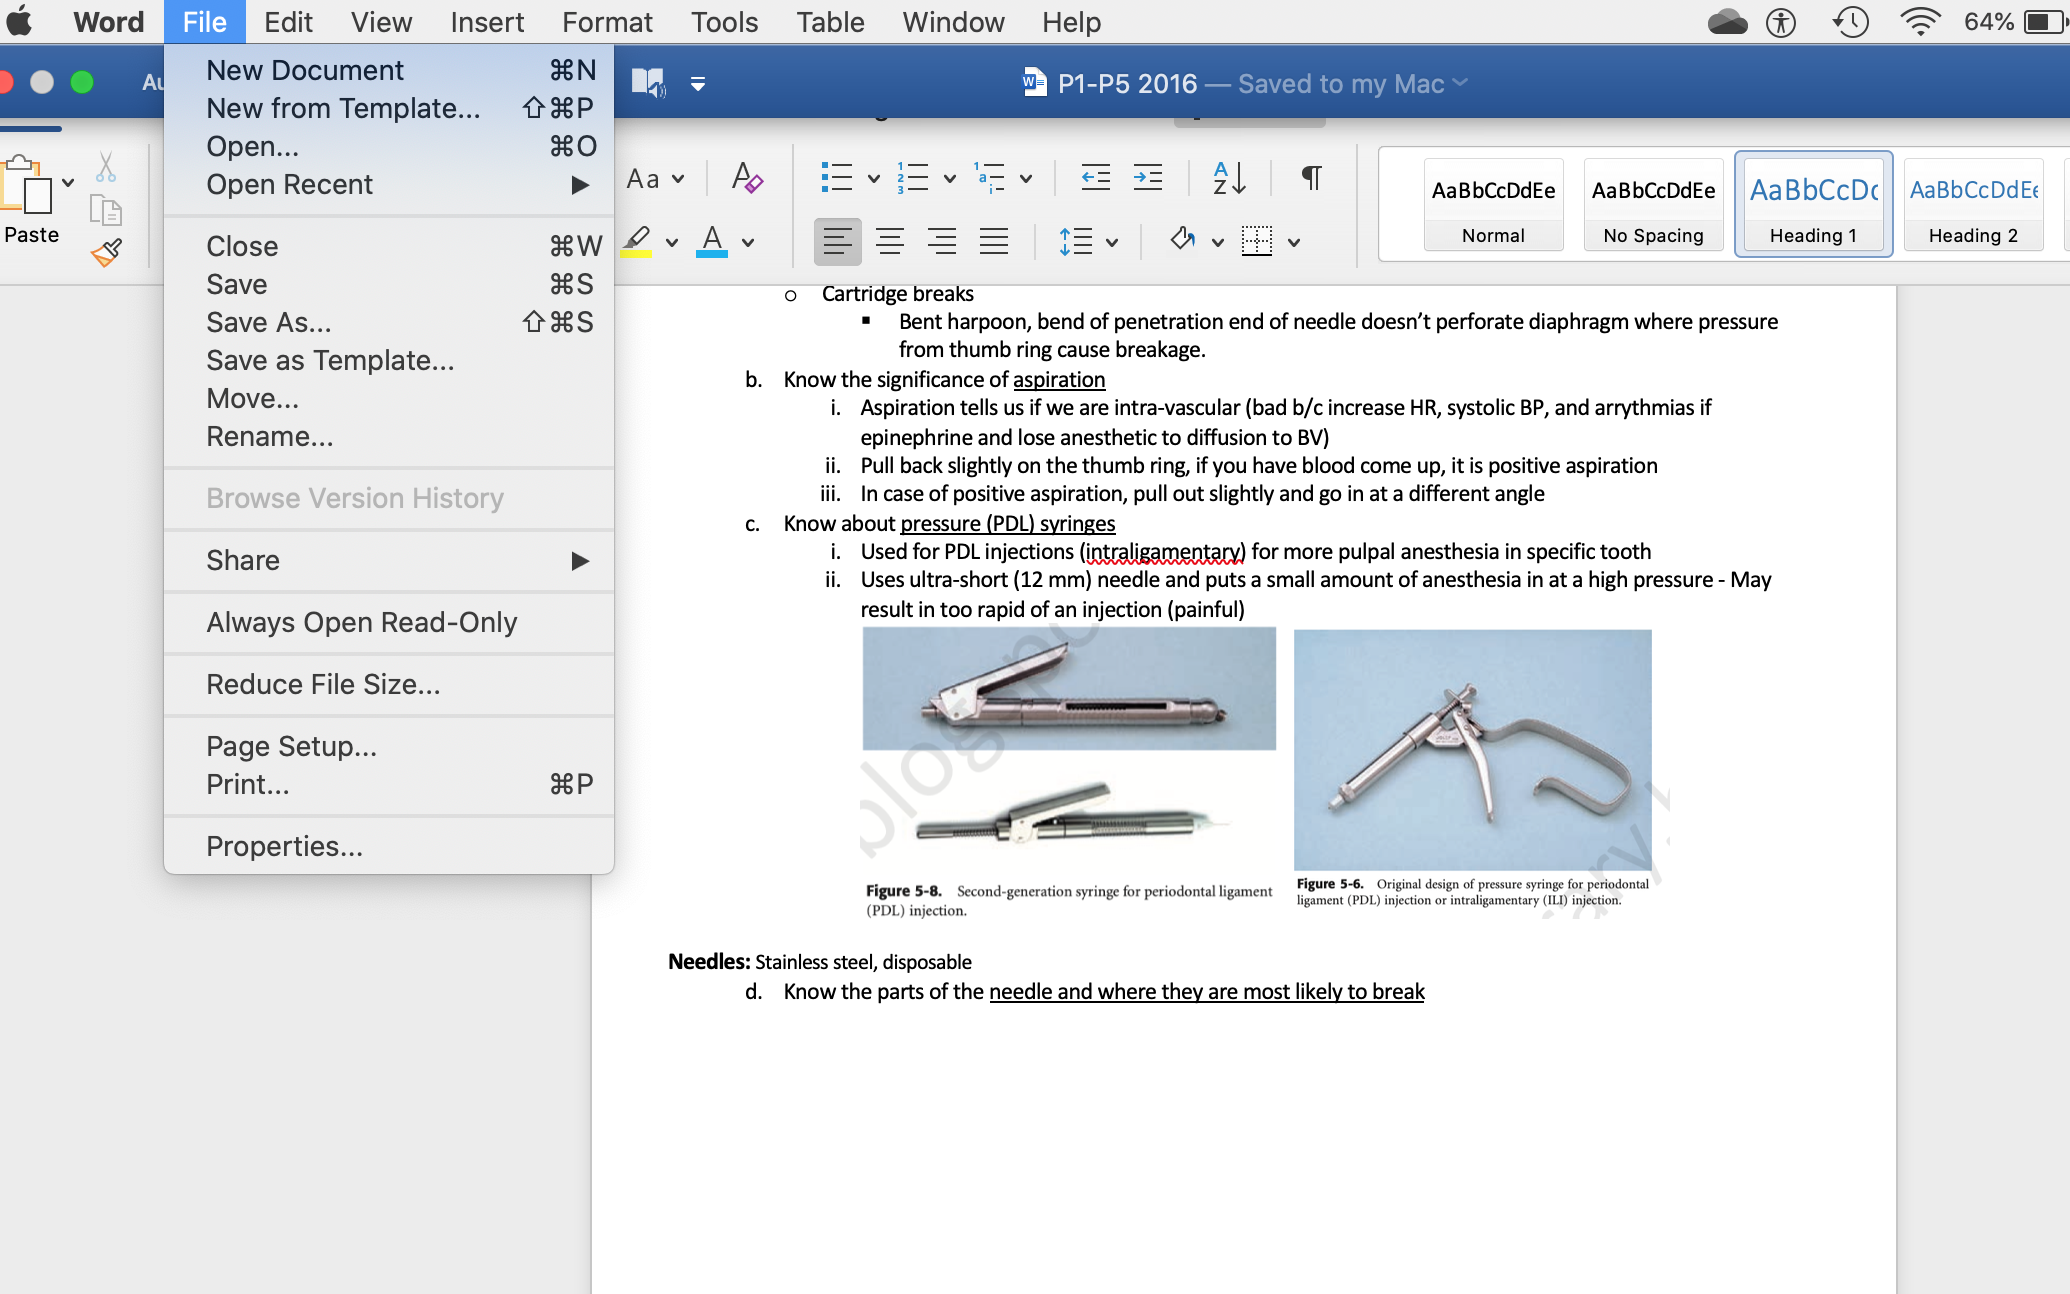 How To Get Free Version Of Word